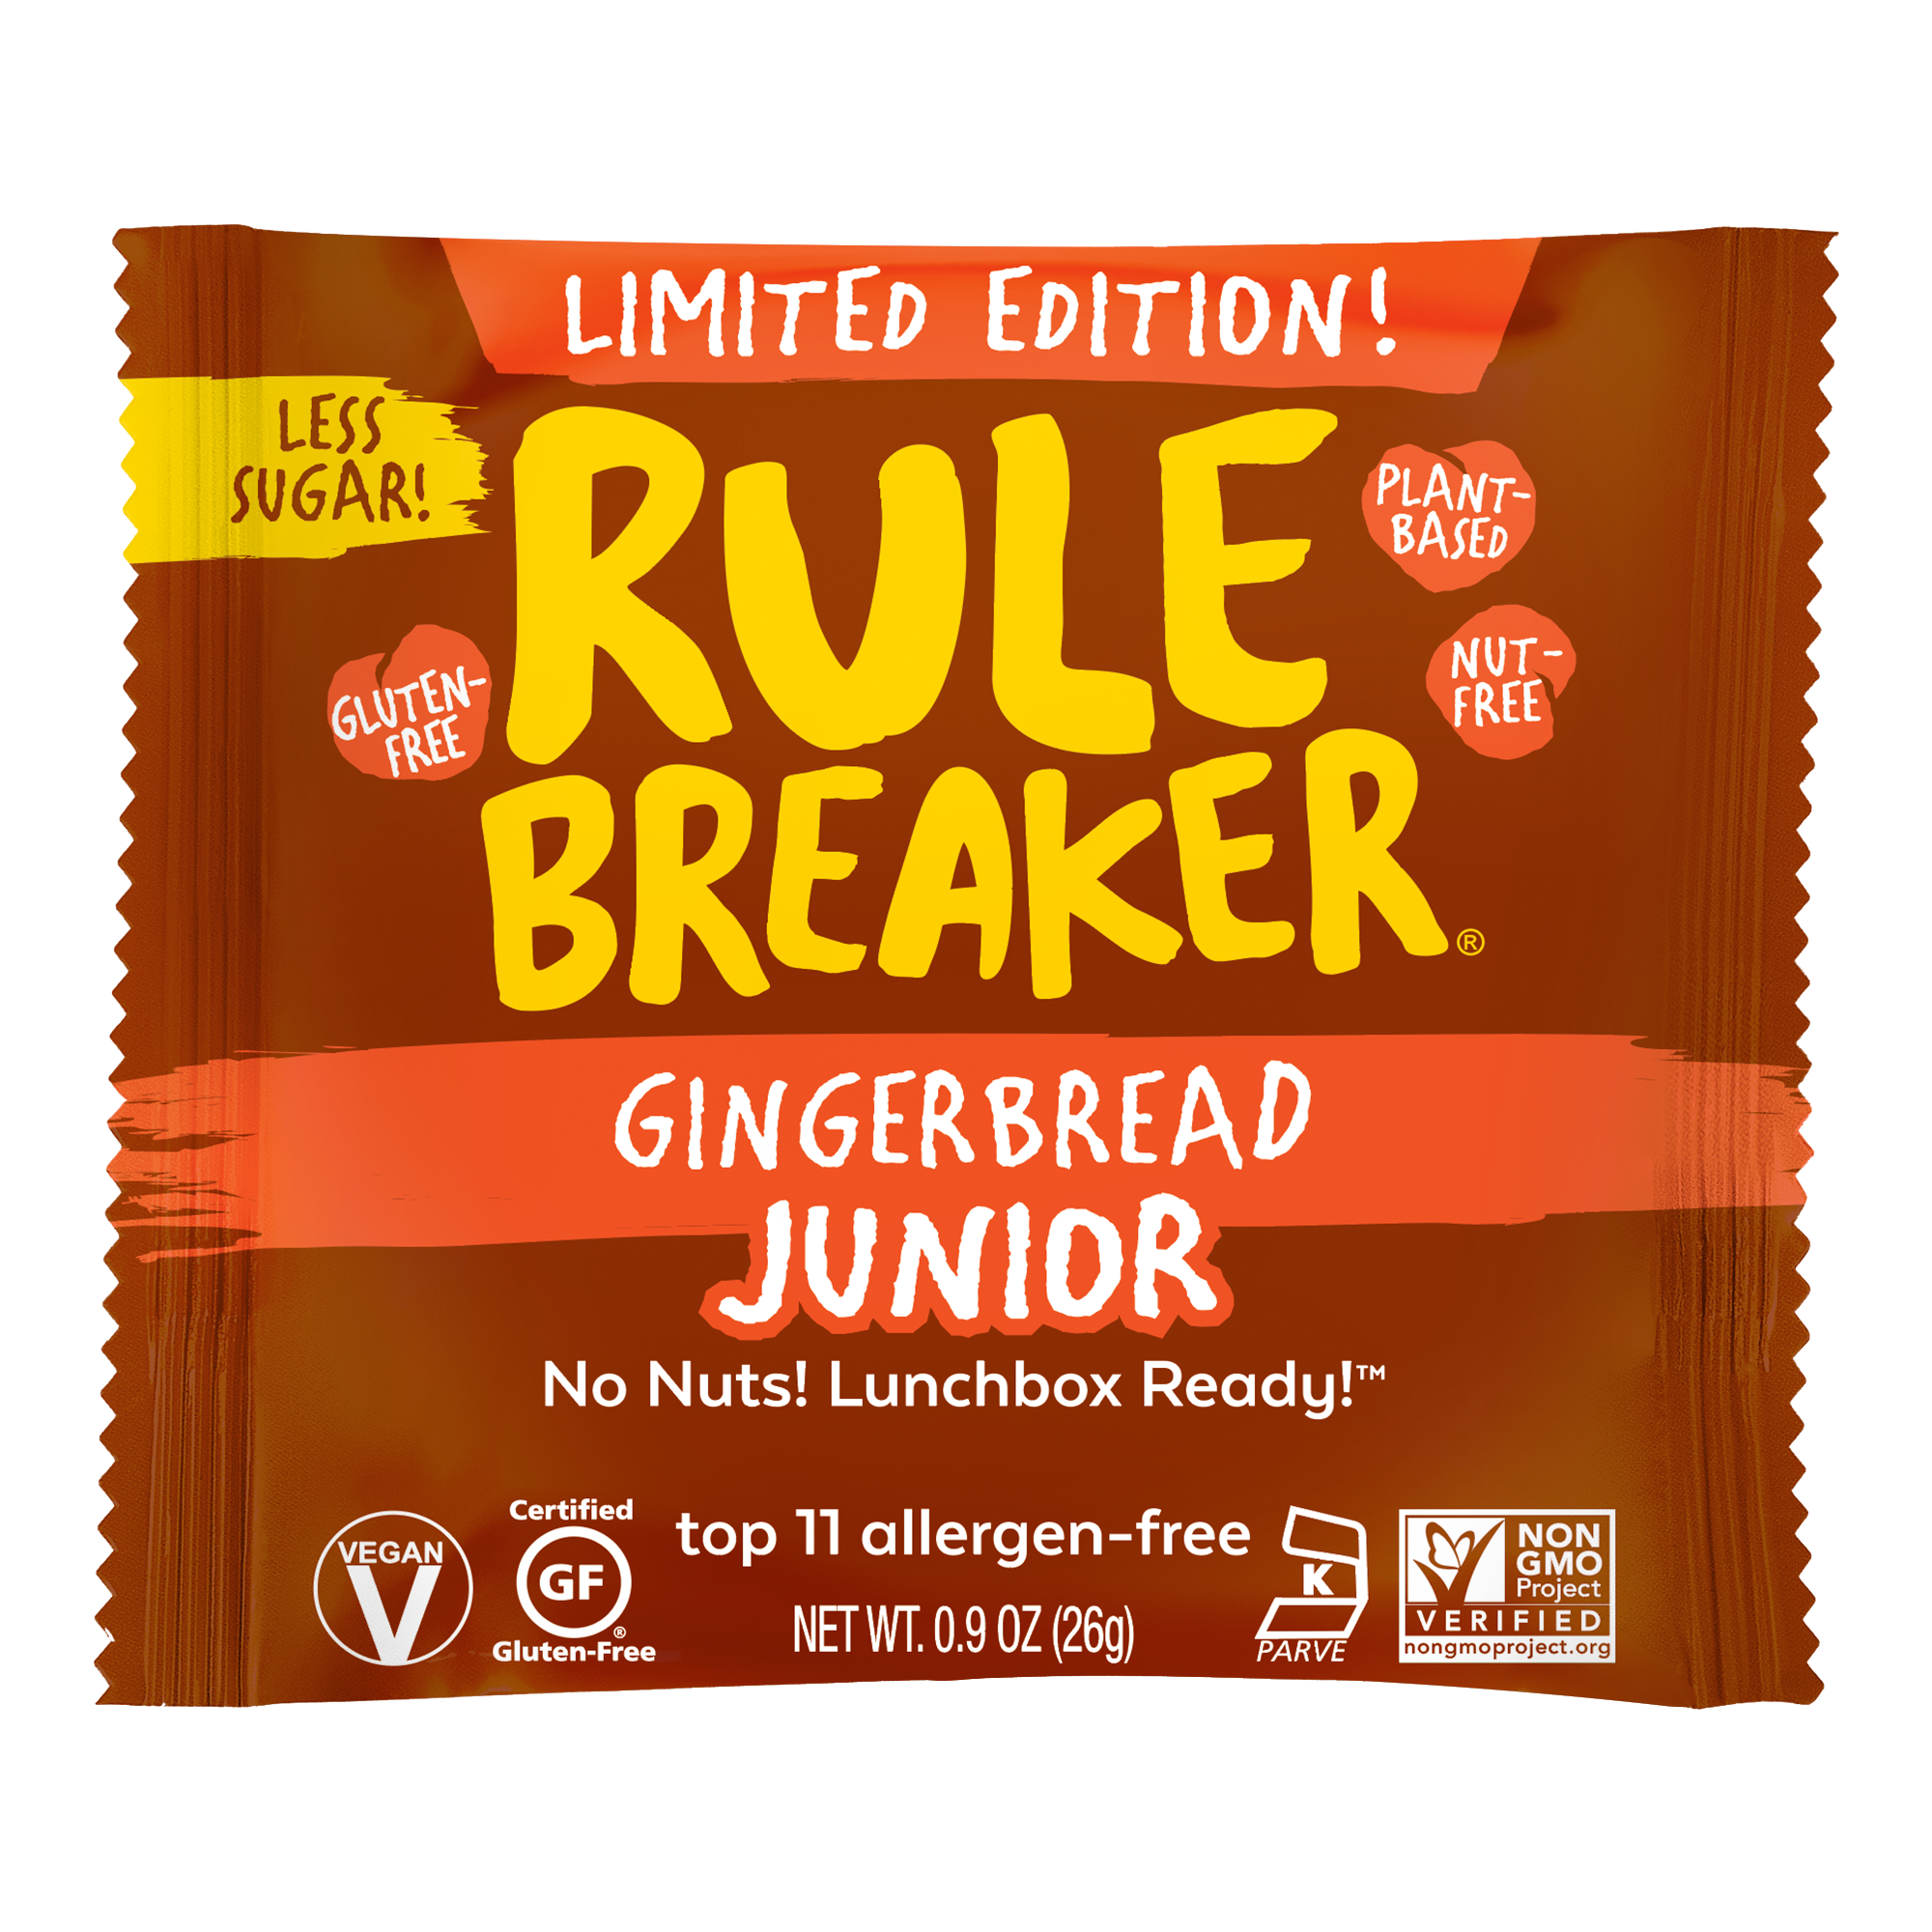 Gingerbread Juniors feature creamy white chocolate chips, warm ginger, cinnamon and all-spice.